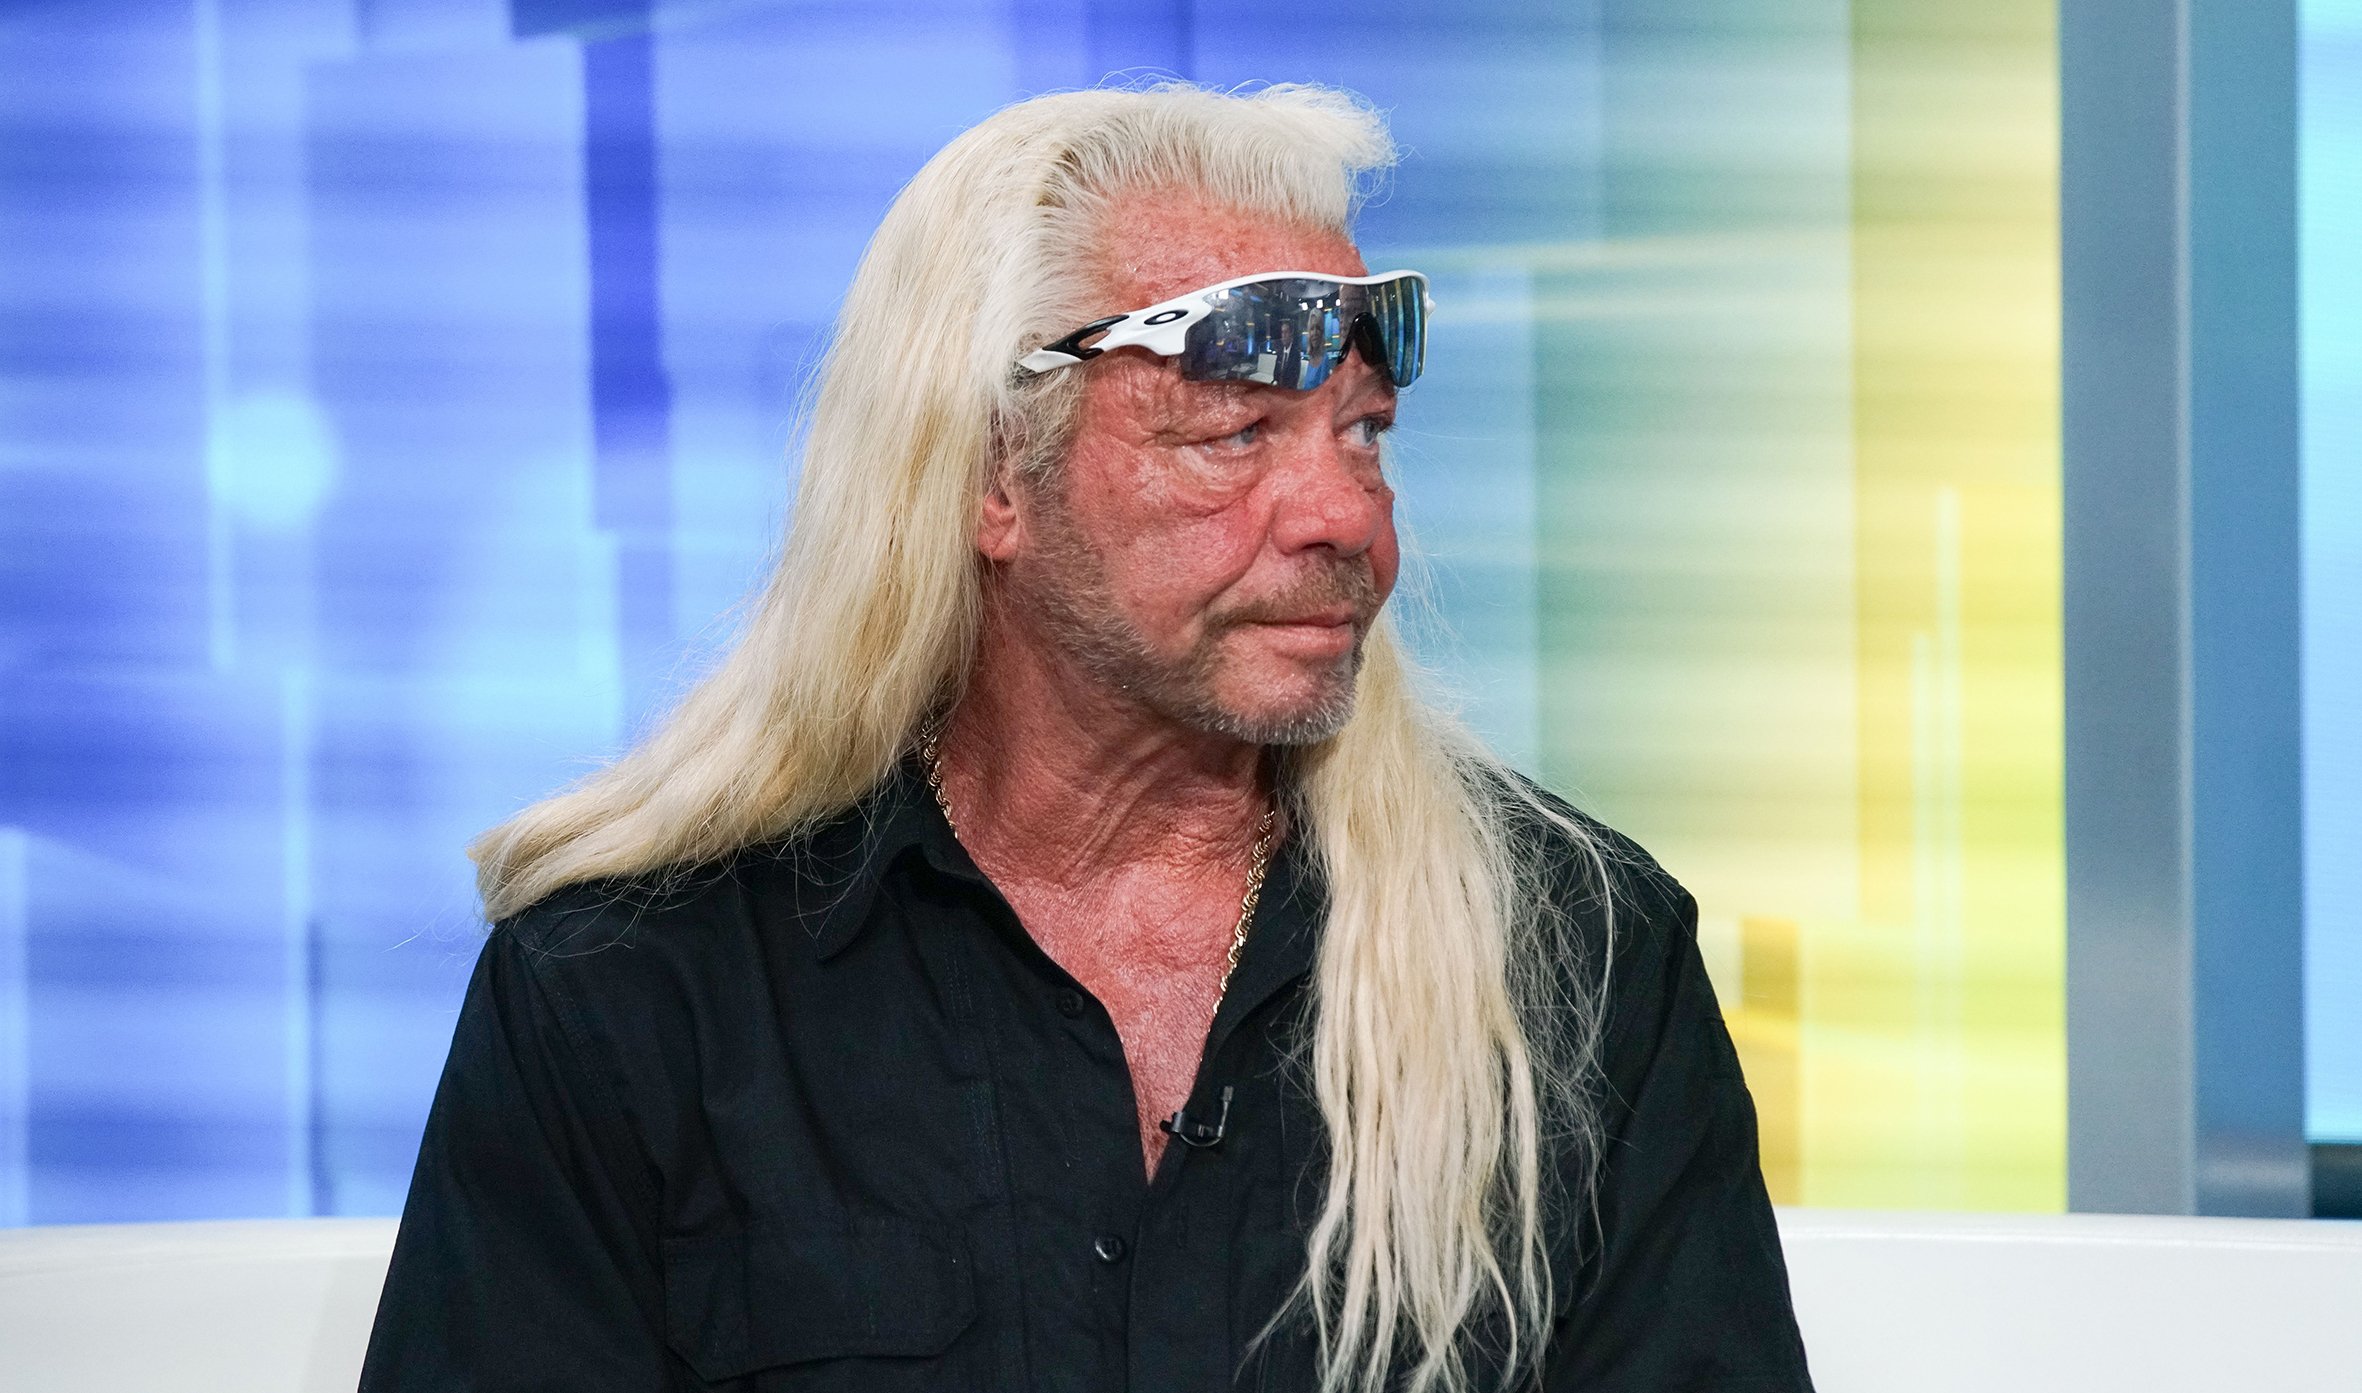 Duane Chapman at FOX Studios oin August 2019 in New York | Photo: Getty Images